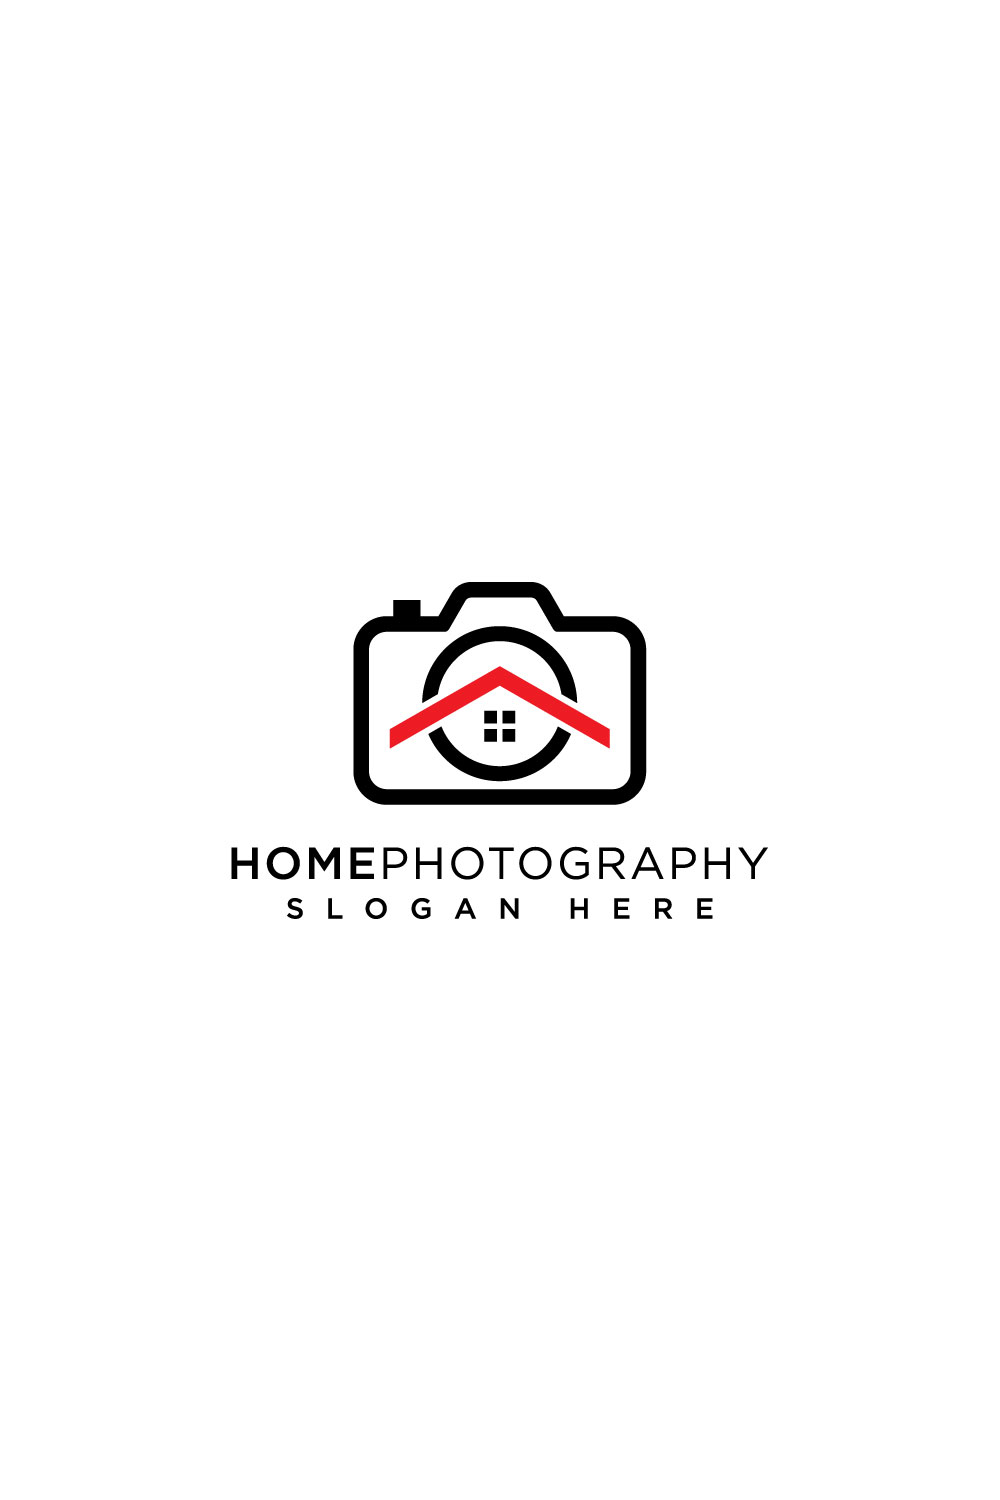 home photograpgy logo pinterest preview image.